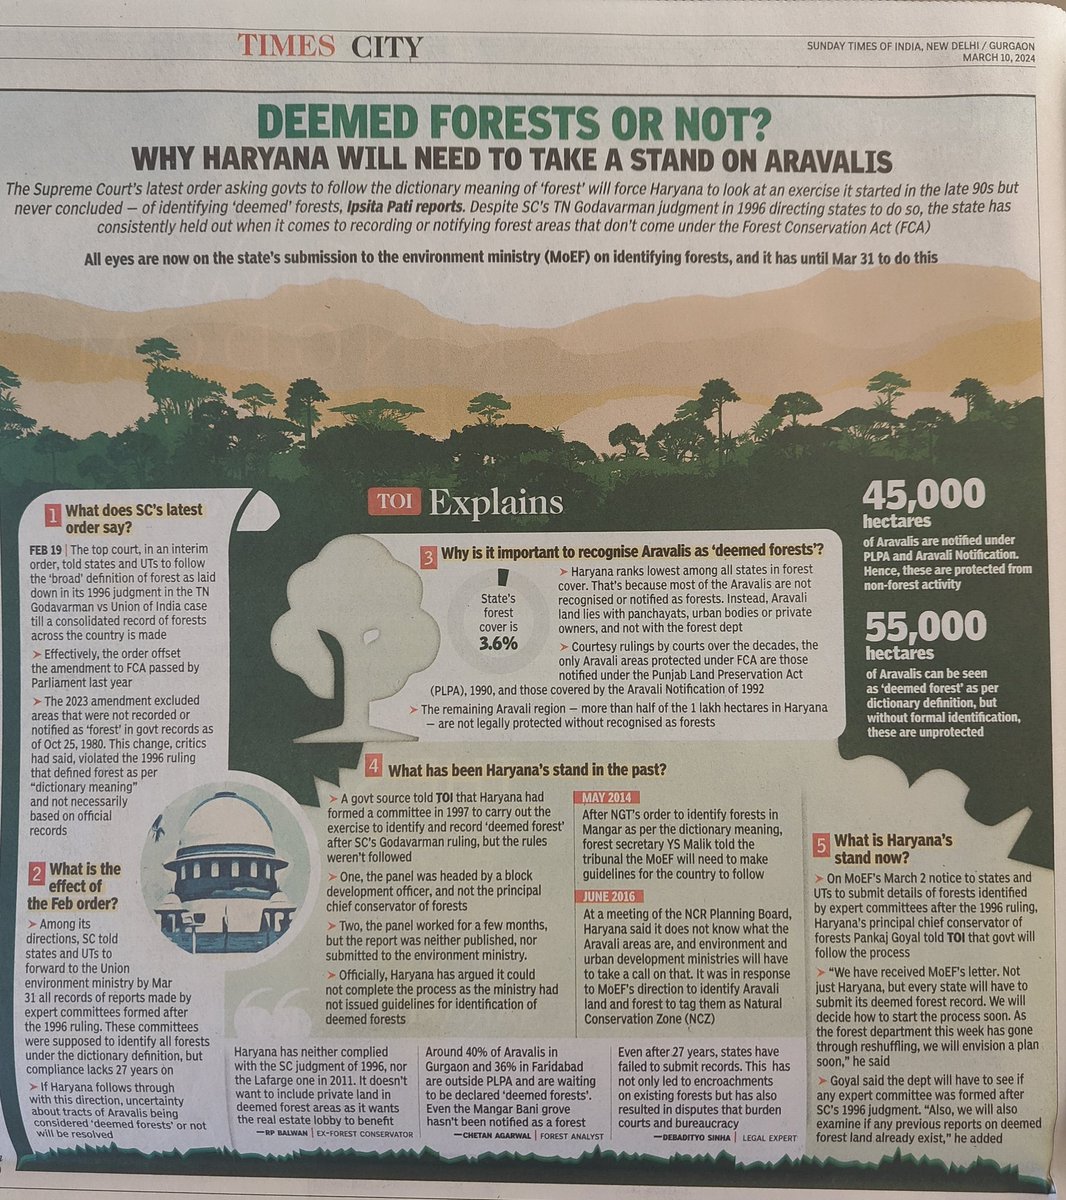 Deemed forests or not? Why #Haryana will need to take a stand on #Aravalis. All eyes are now on the Haryana's submission to the @moefcc on identifying forests, and it has until March 31 to do so @SPYadavIFS @ParveenKaswan @iForestGlobal @rahuulchoudhary